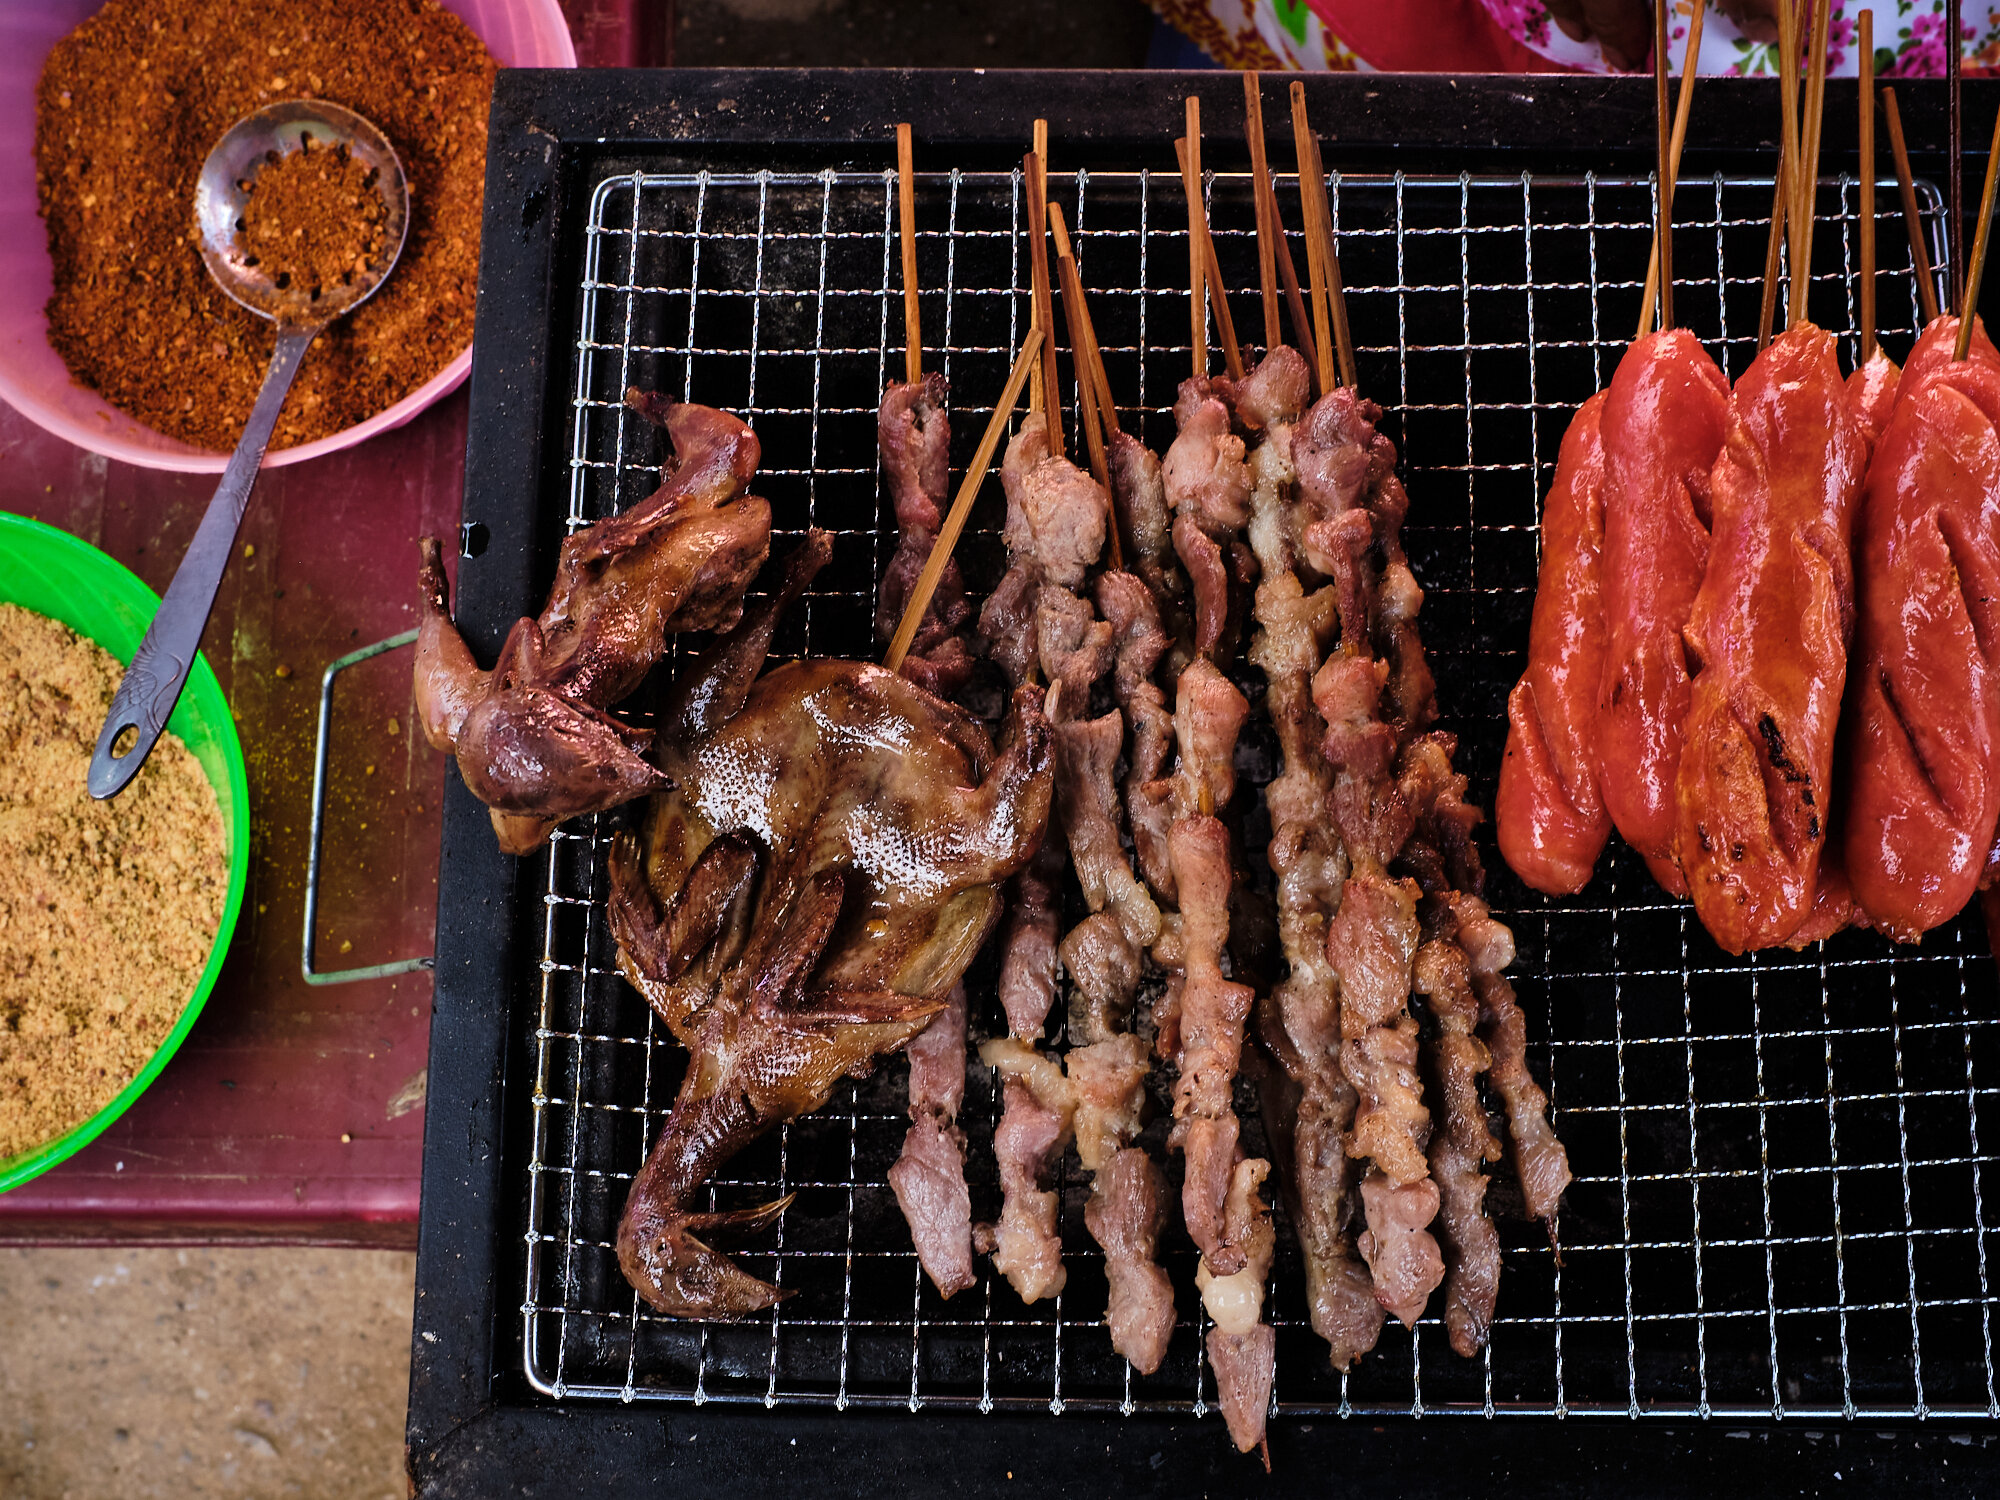  Barbecued meat products at Dong van market in Vietnam 